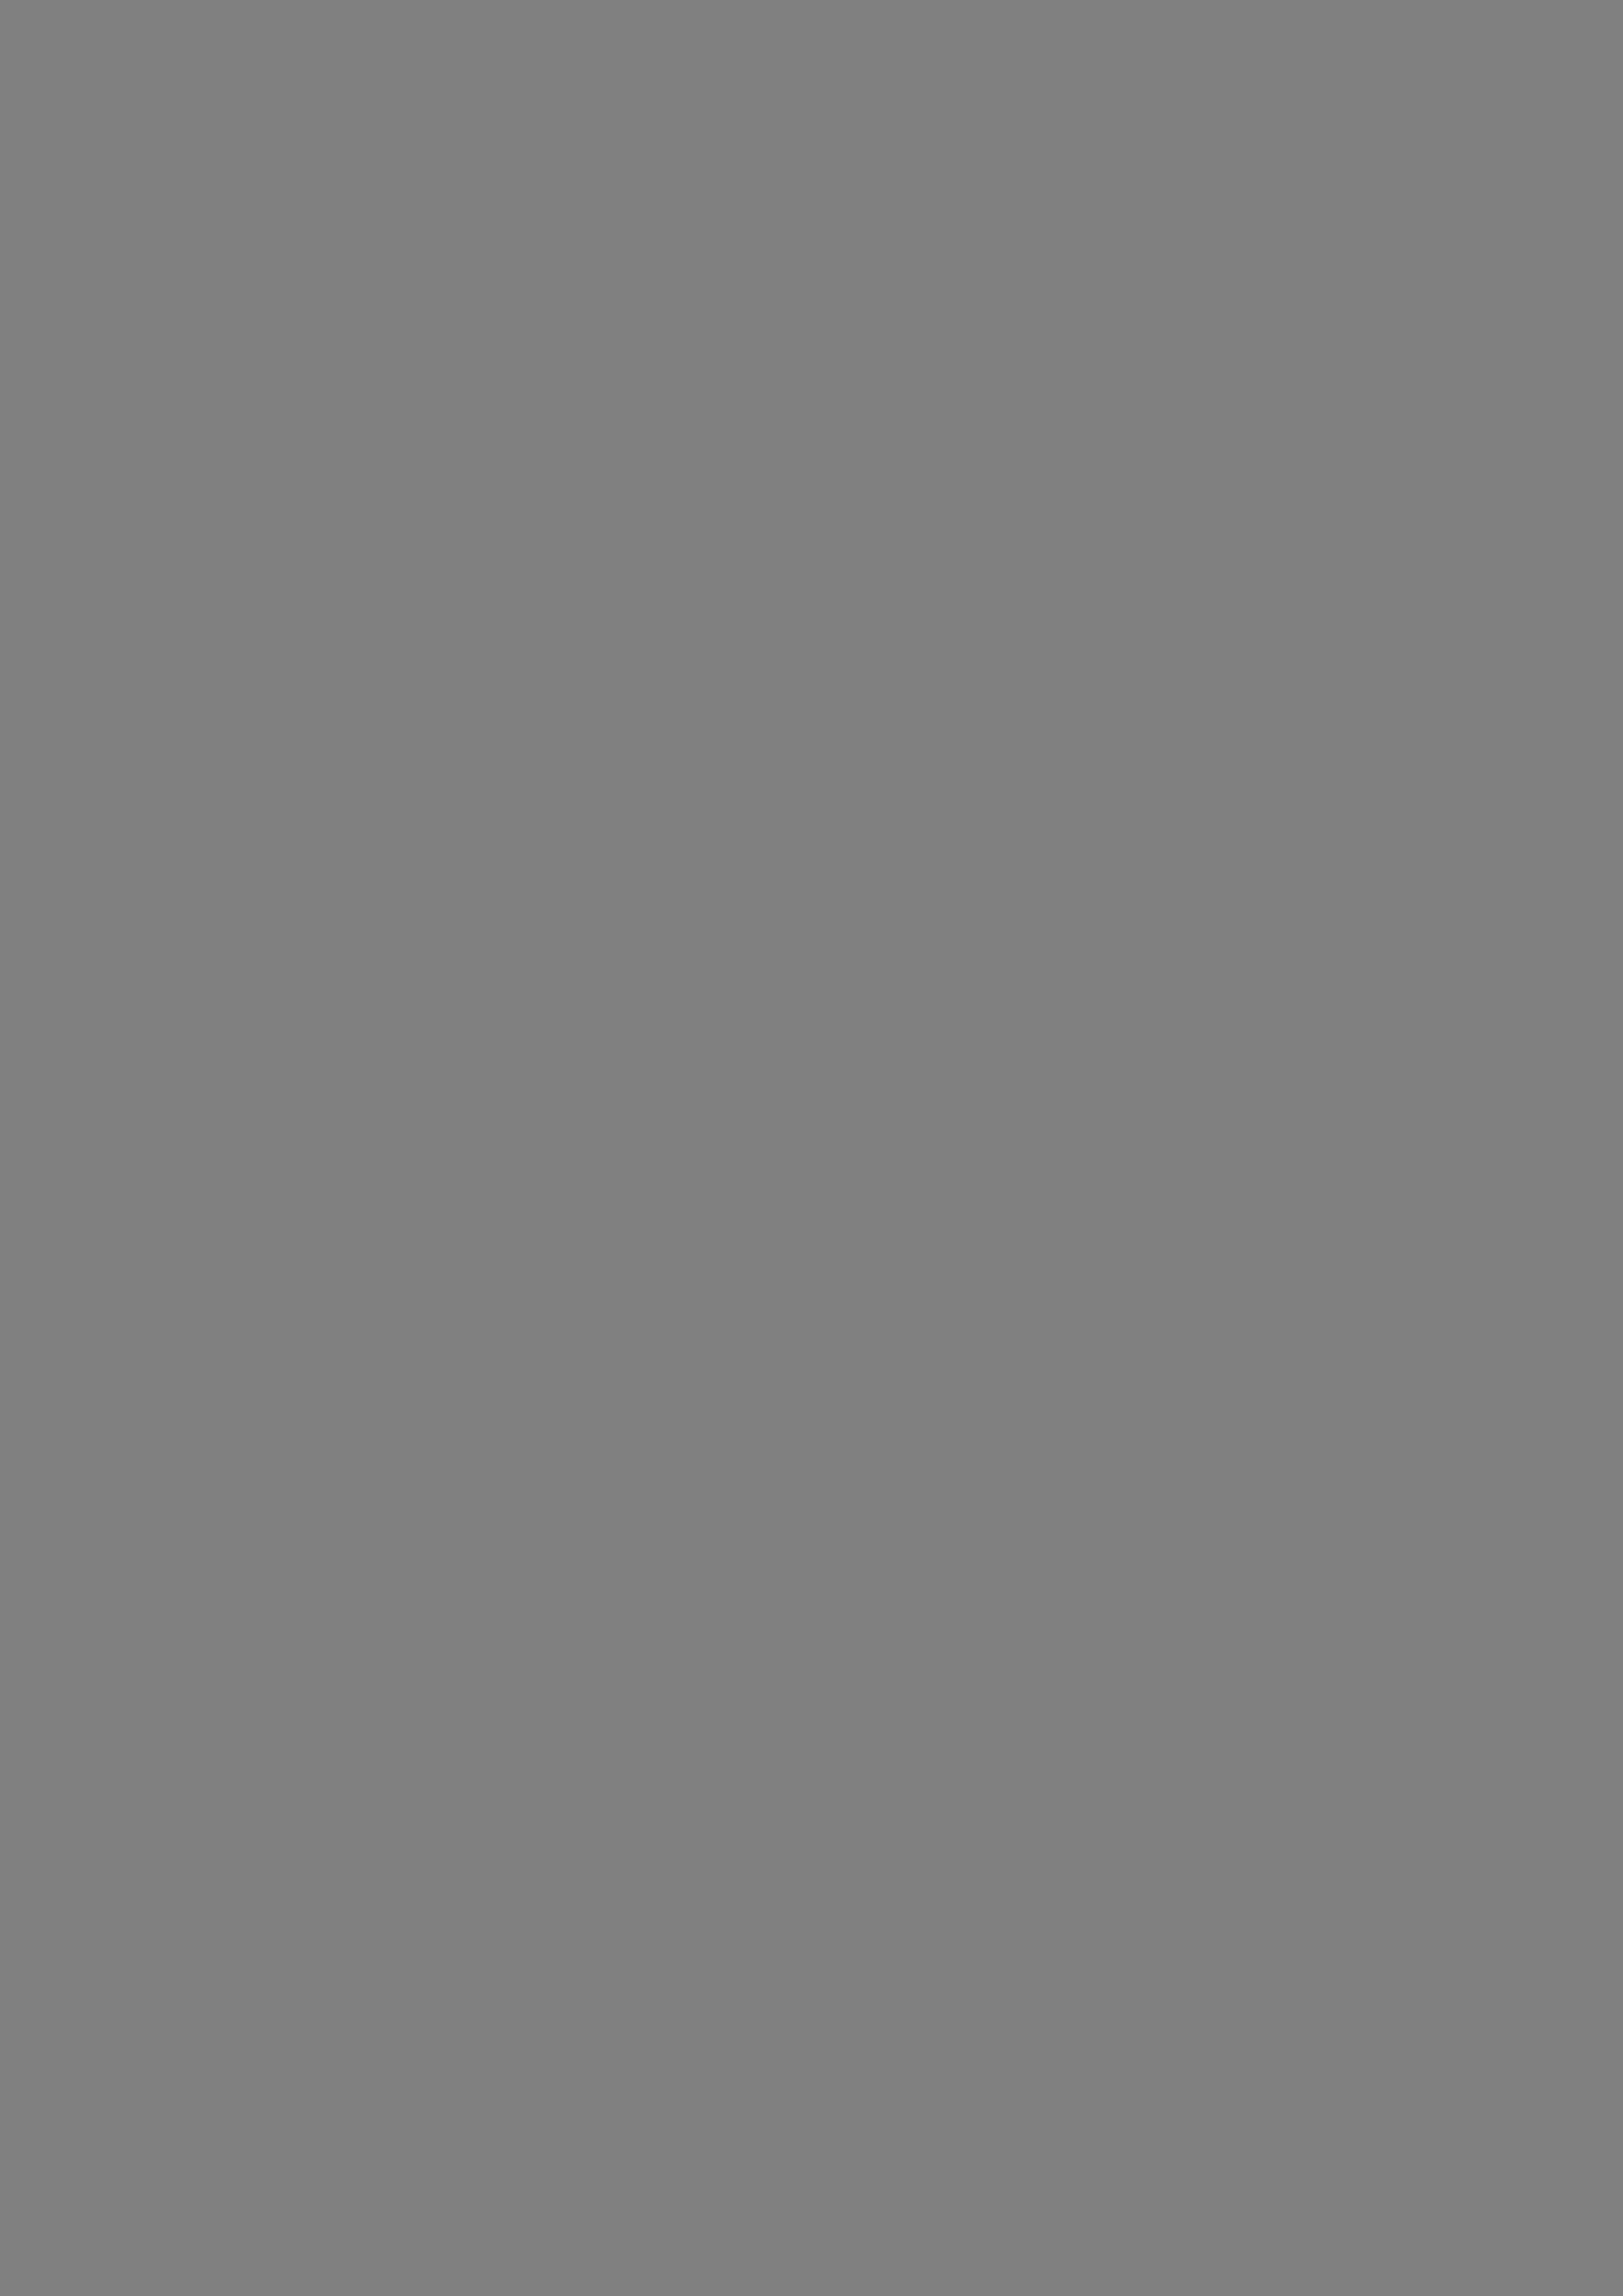 2480x3508 Gray Web Gray Solid Color Background